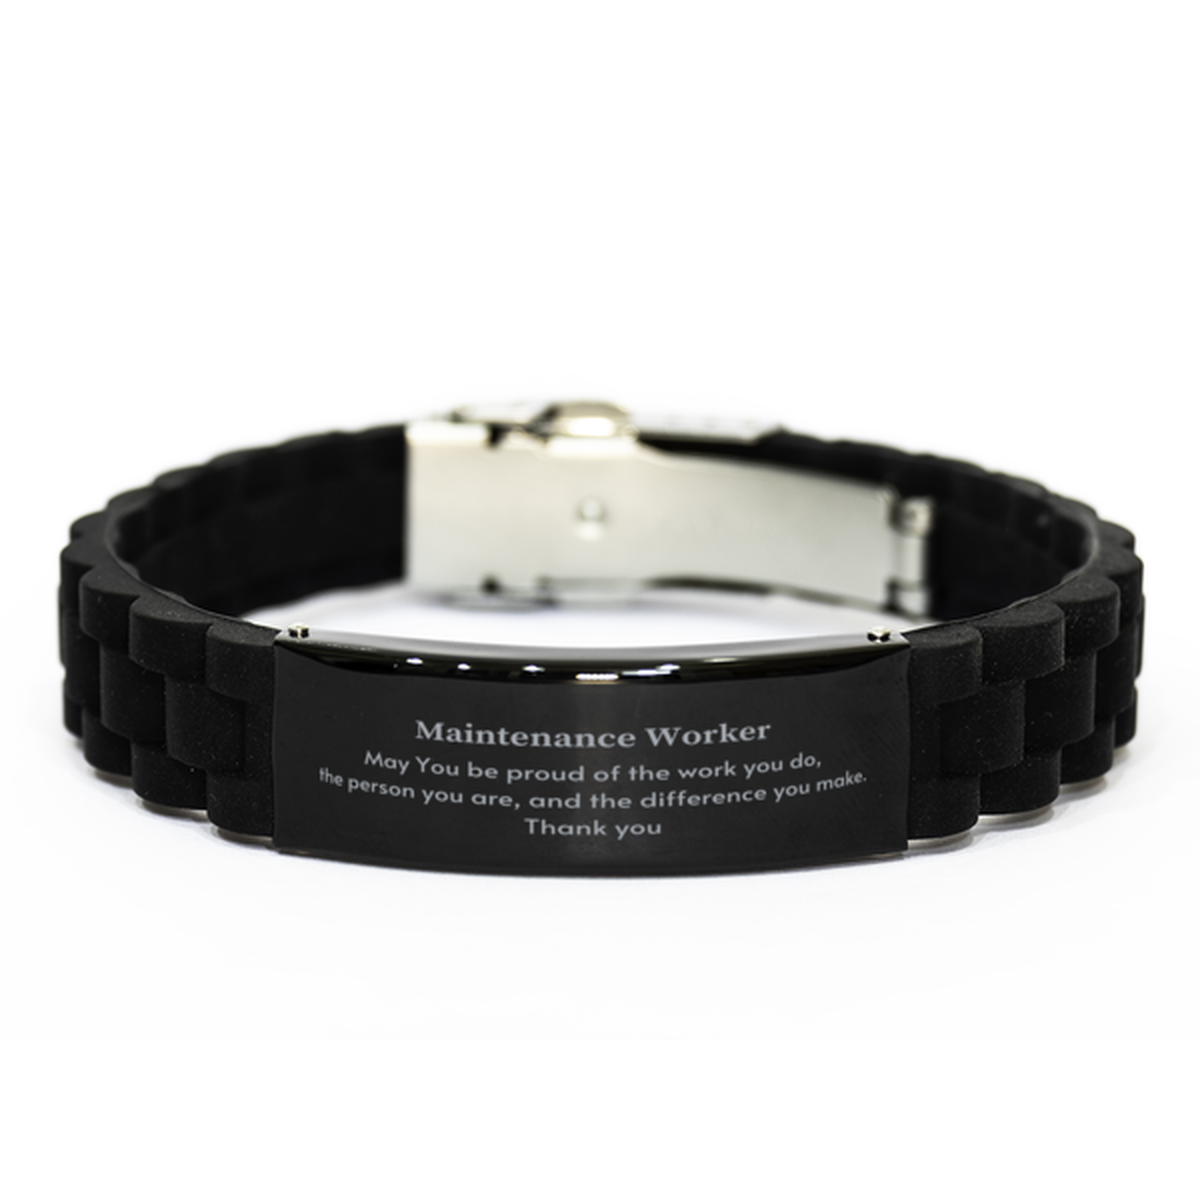 Heartwarming Black Glidelock Clasp Bracelet Retirement Coworkers Gifts for Maintenance Worker, Maintenance Worker May You be proud of the work you do, the person you are Gifts for Boss Men Women Friends